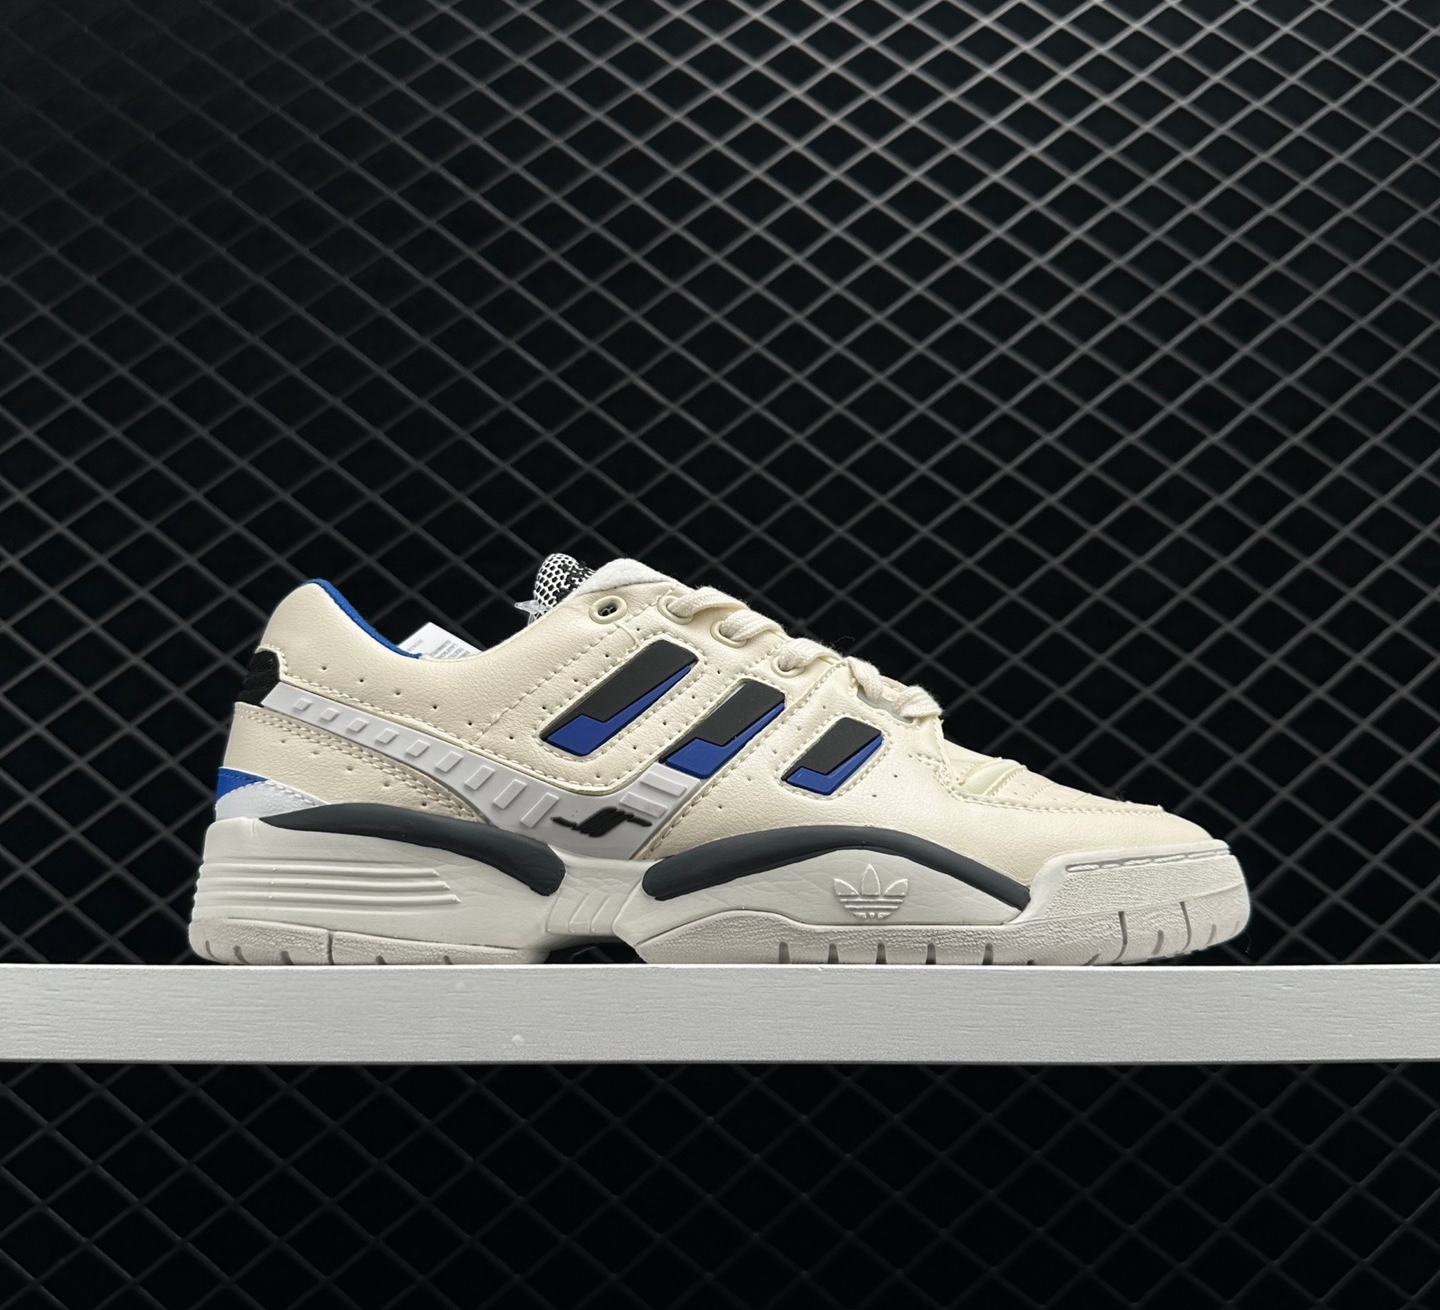 Adidas Originals TORSION COMP White Blue EE7377: A Classic and Stylish Sneaker